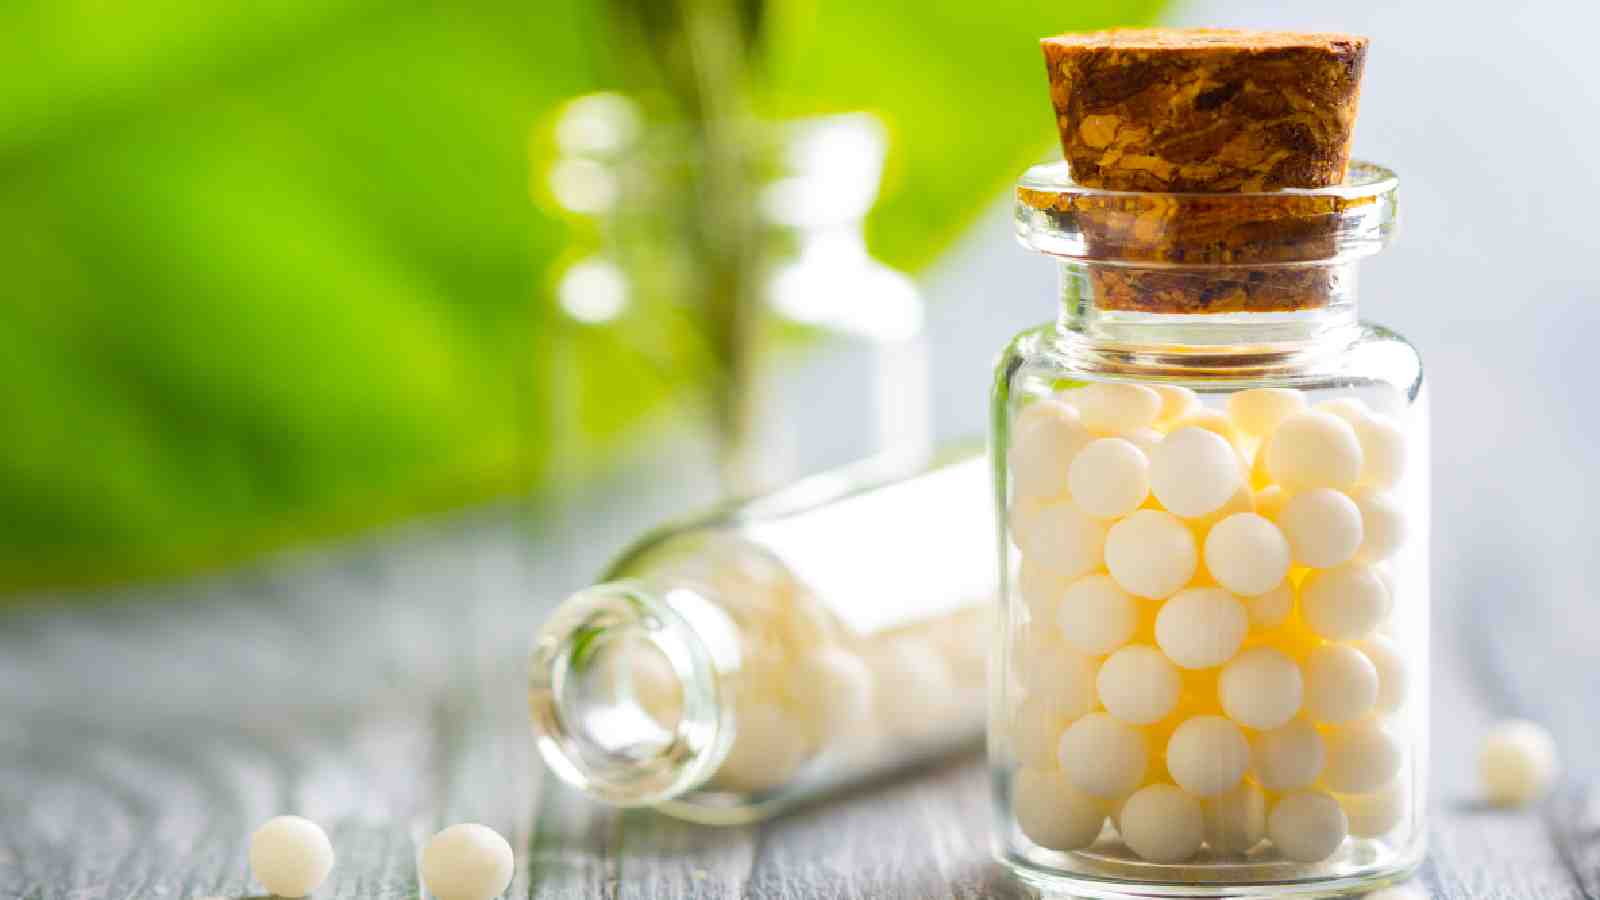 PCOS: How effective is homeopathy to manage the condition?